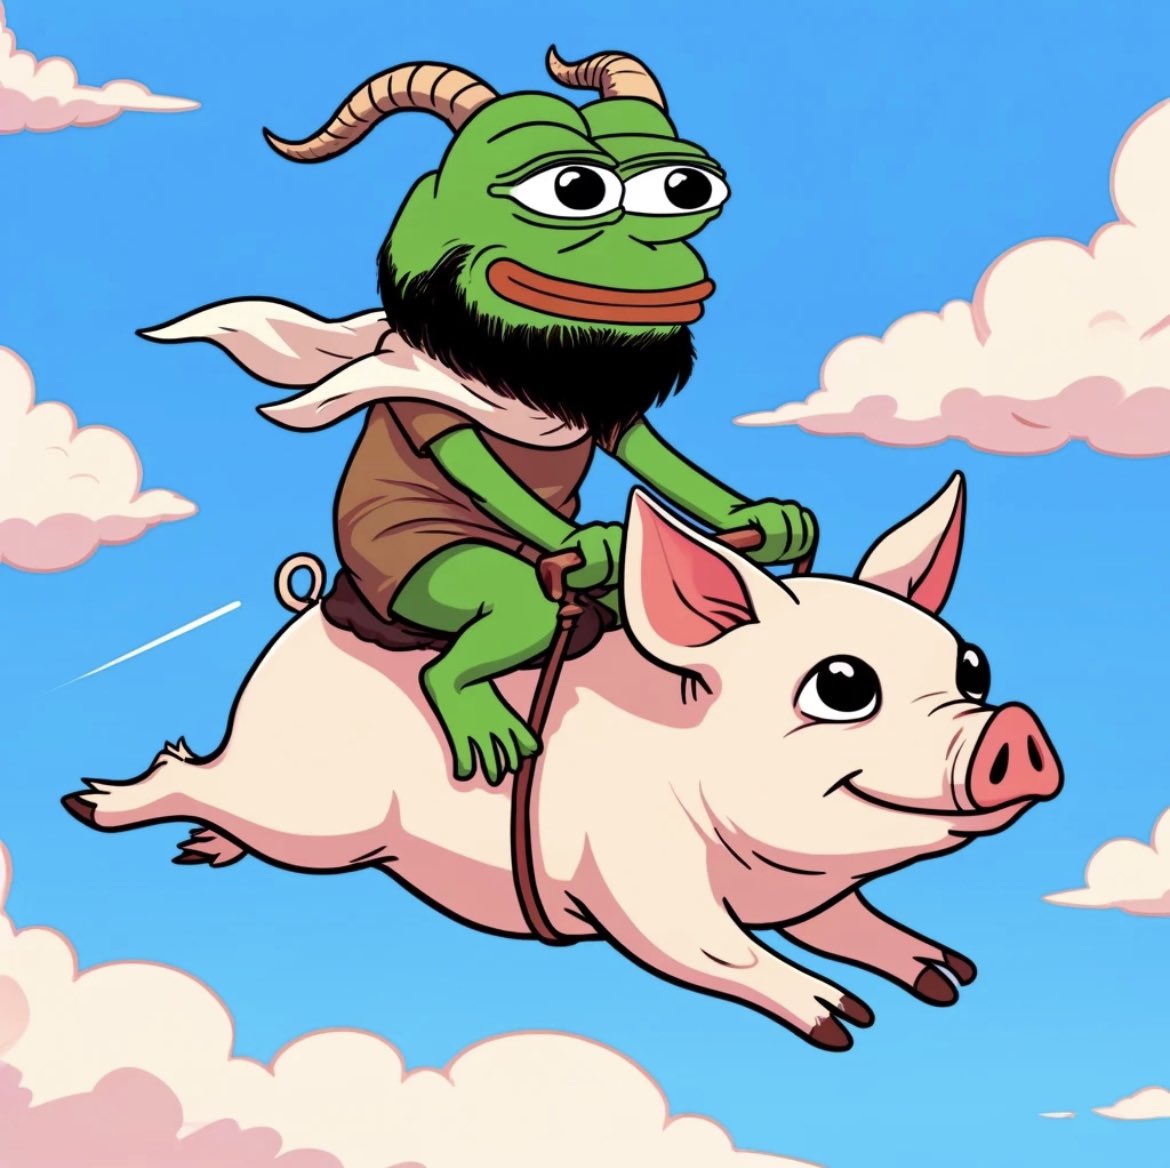 Pigs do fly and $DGOAT ‘s are real